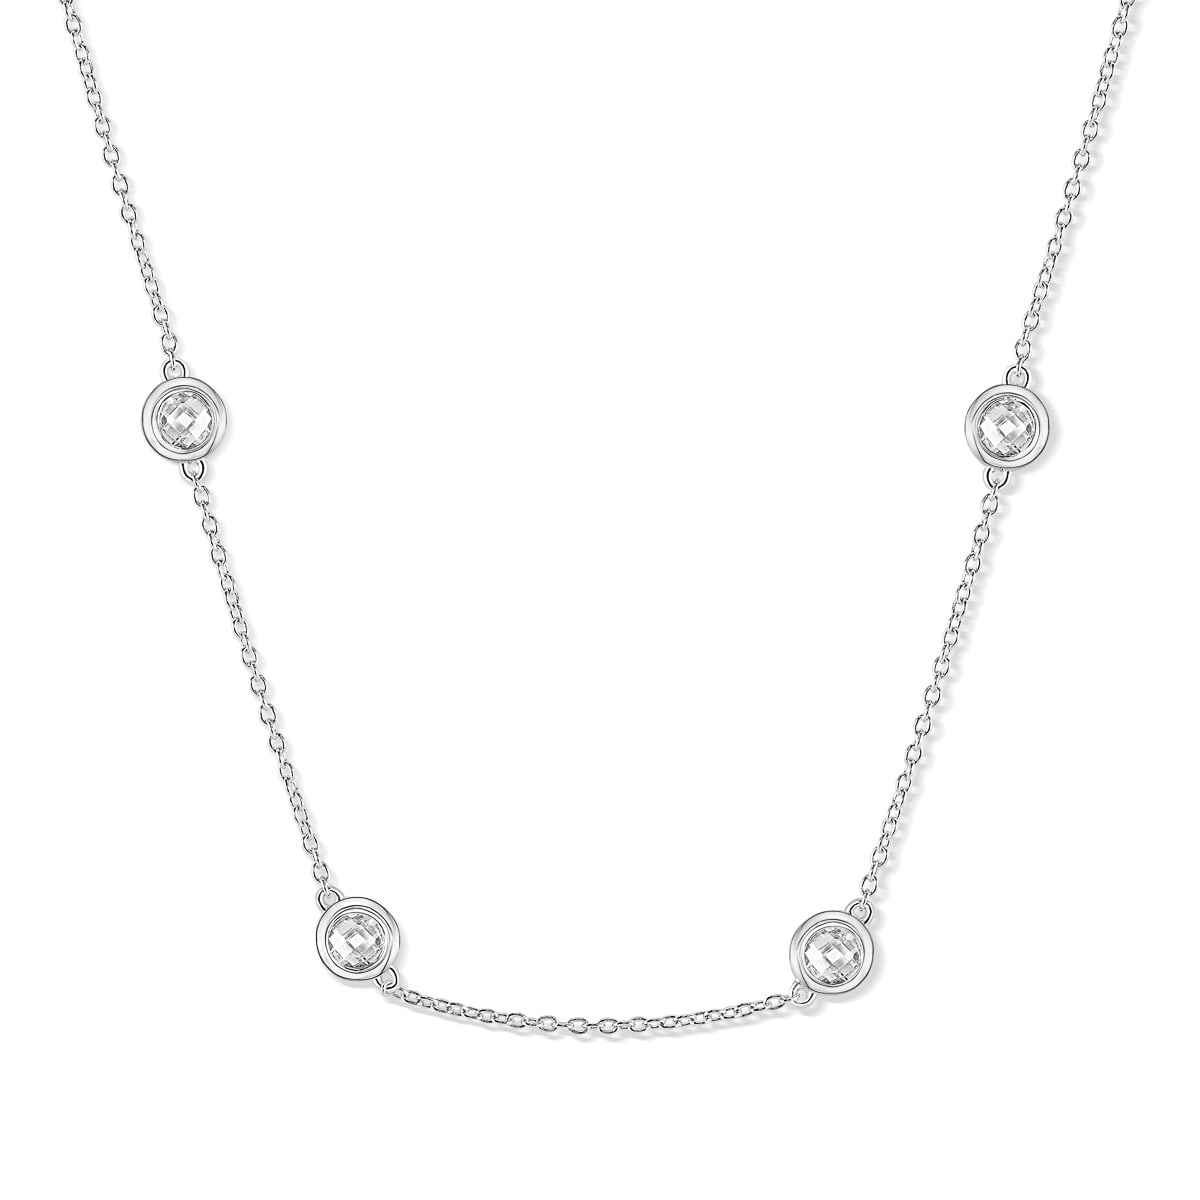 Modern Gents Trading Co Women's Affinity Necklace